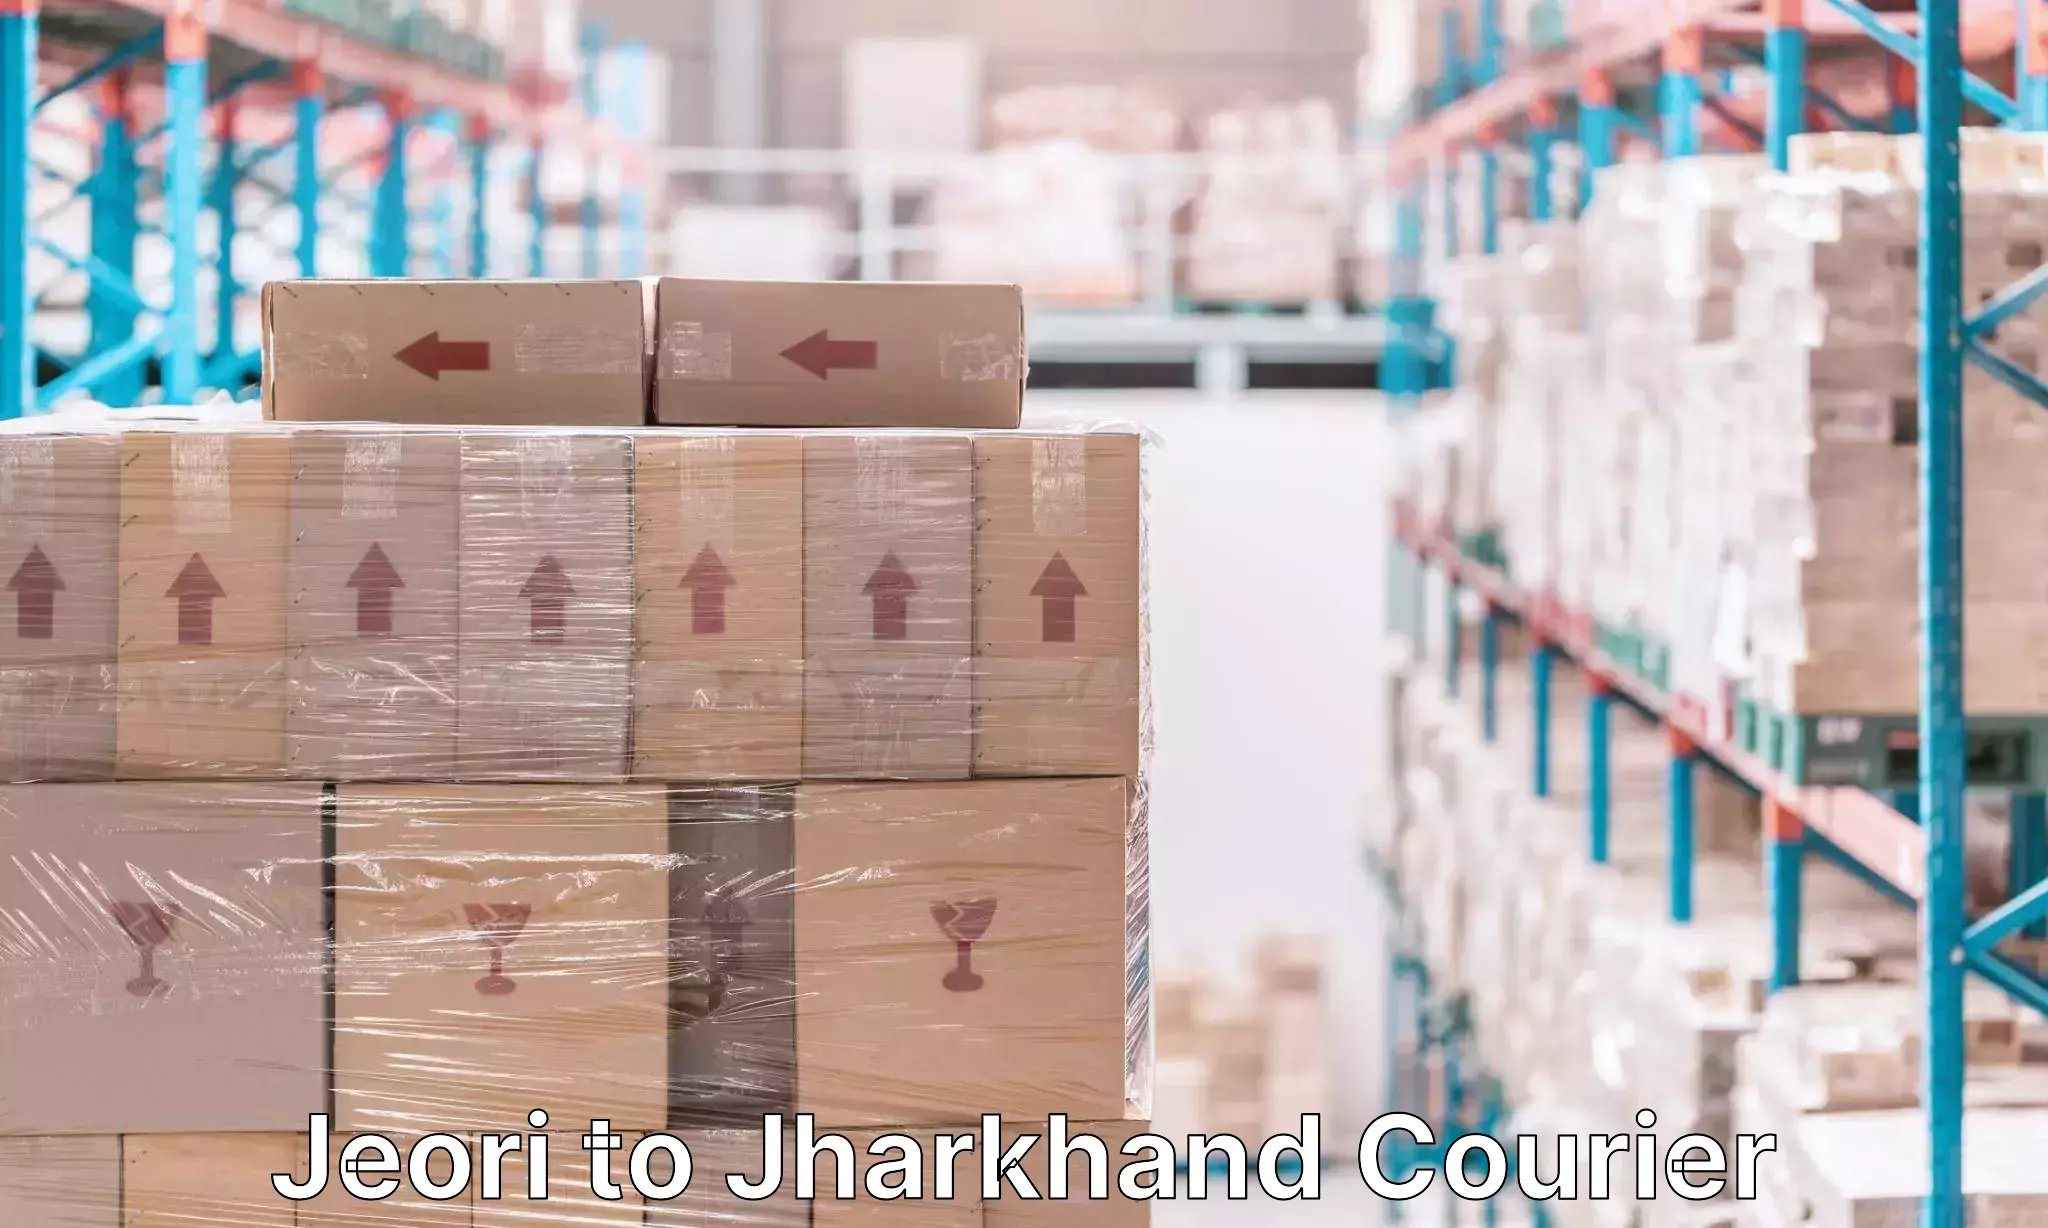 Doorstep luggage collection Jeori to Jharkhand